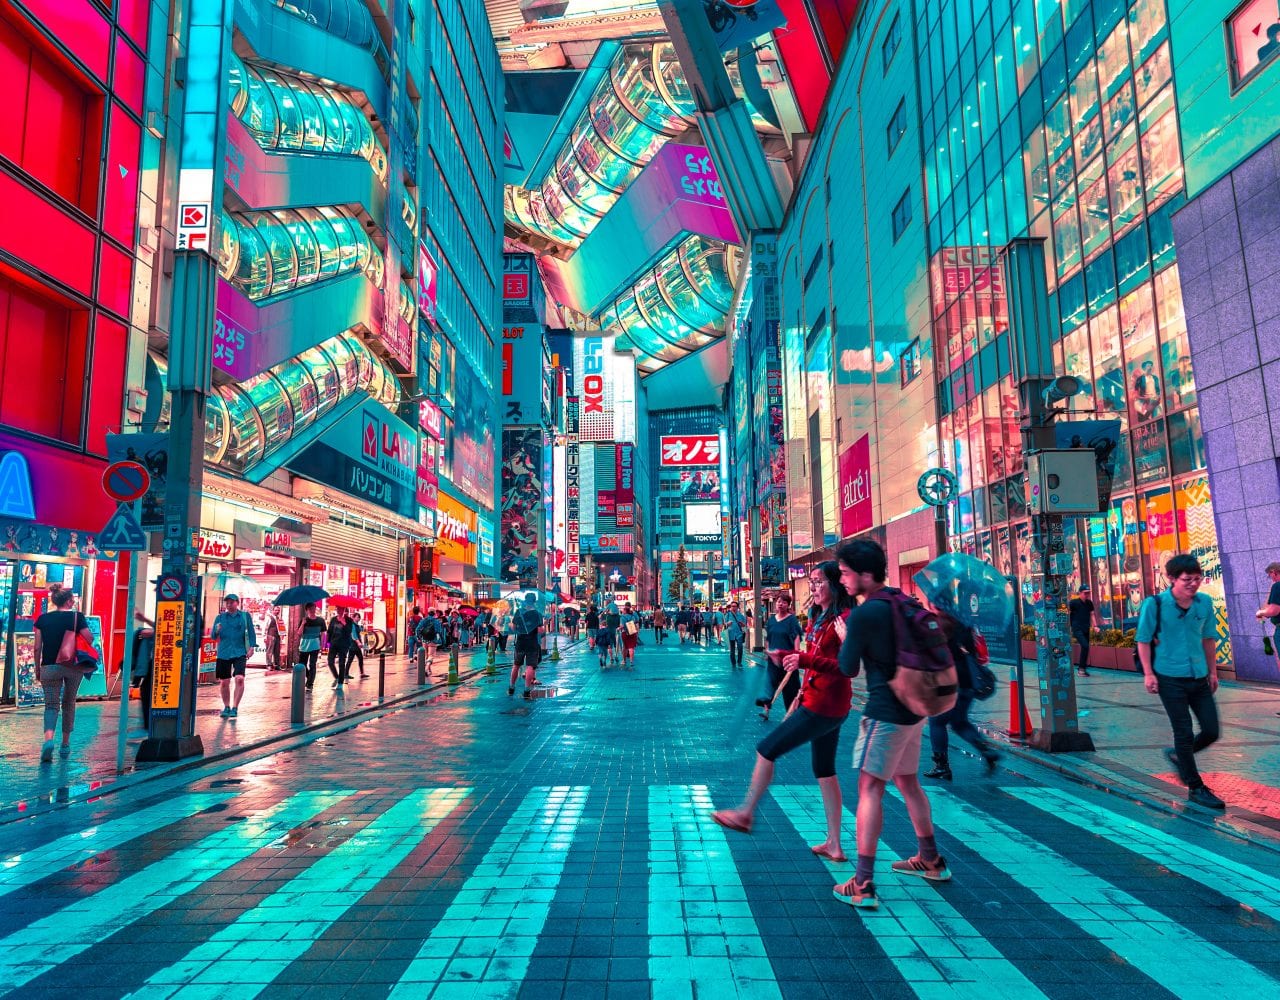 A top destination for Japan in 2023 is Tokyo